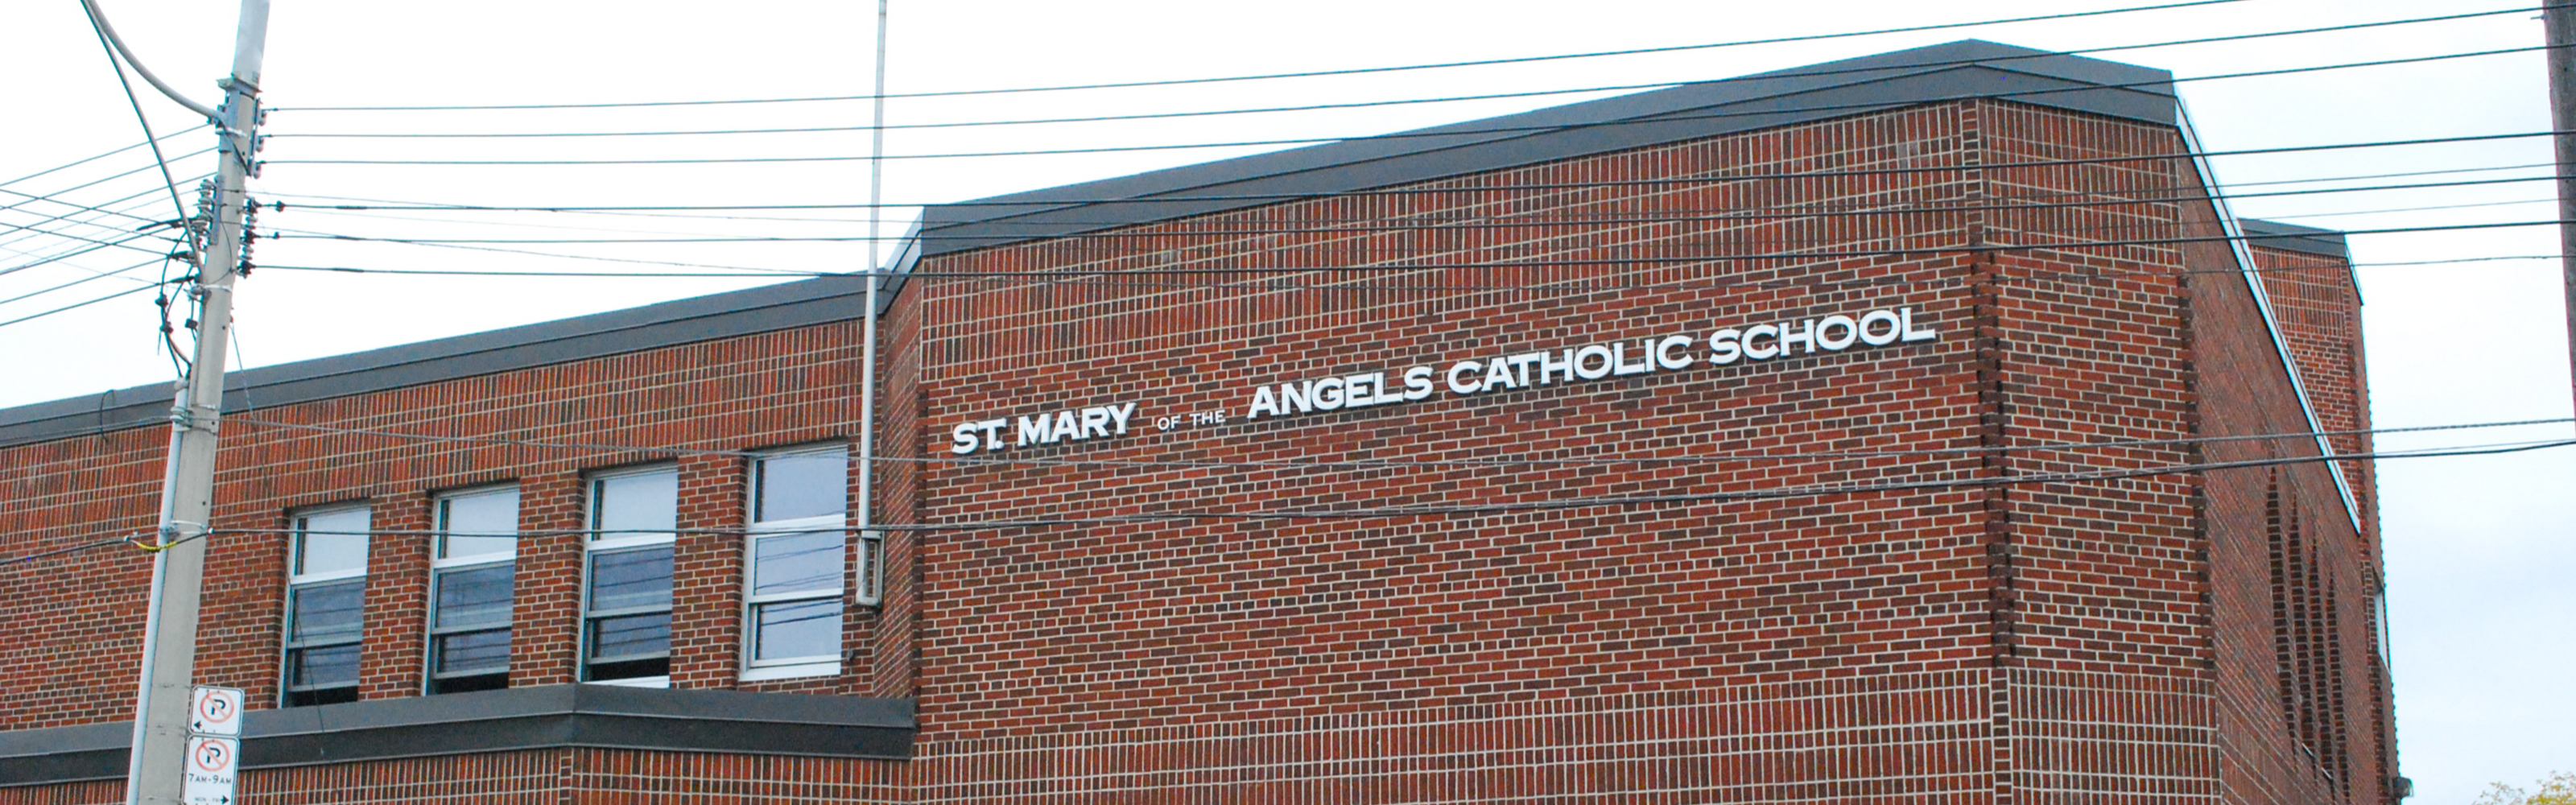 The front of the St. Mary of the Angels Catholic School building.